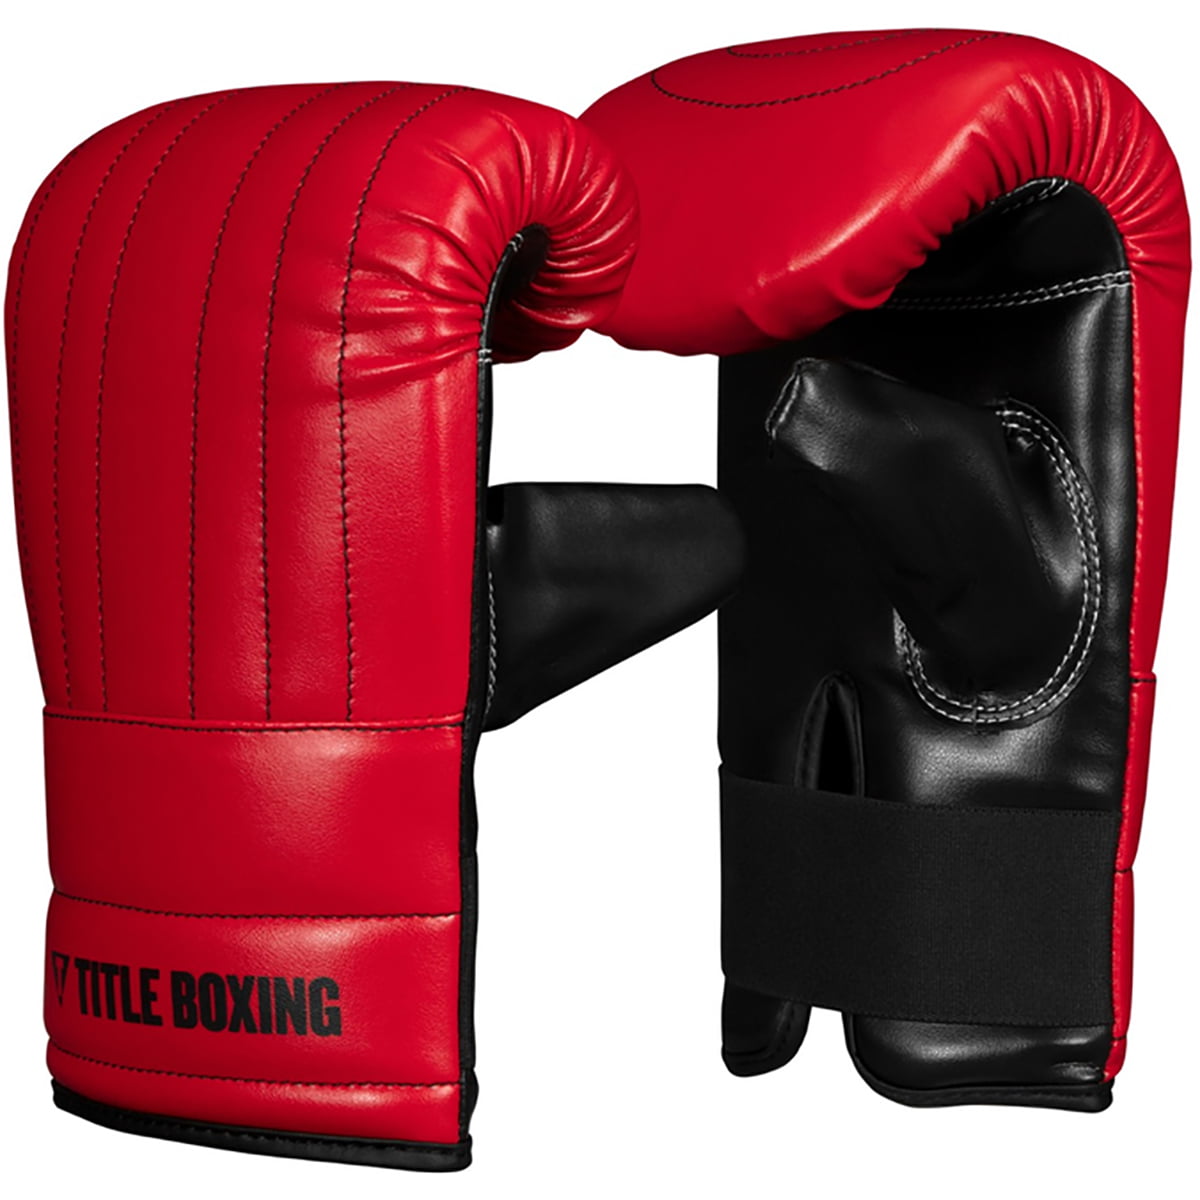 2 Pairs 16oz Adult Size Pro Boxing Gloves & Head Gear Red and Black 